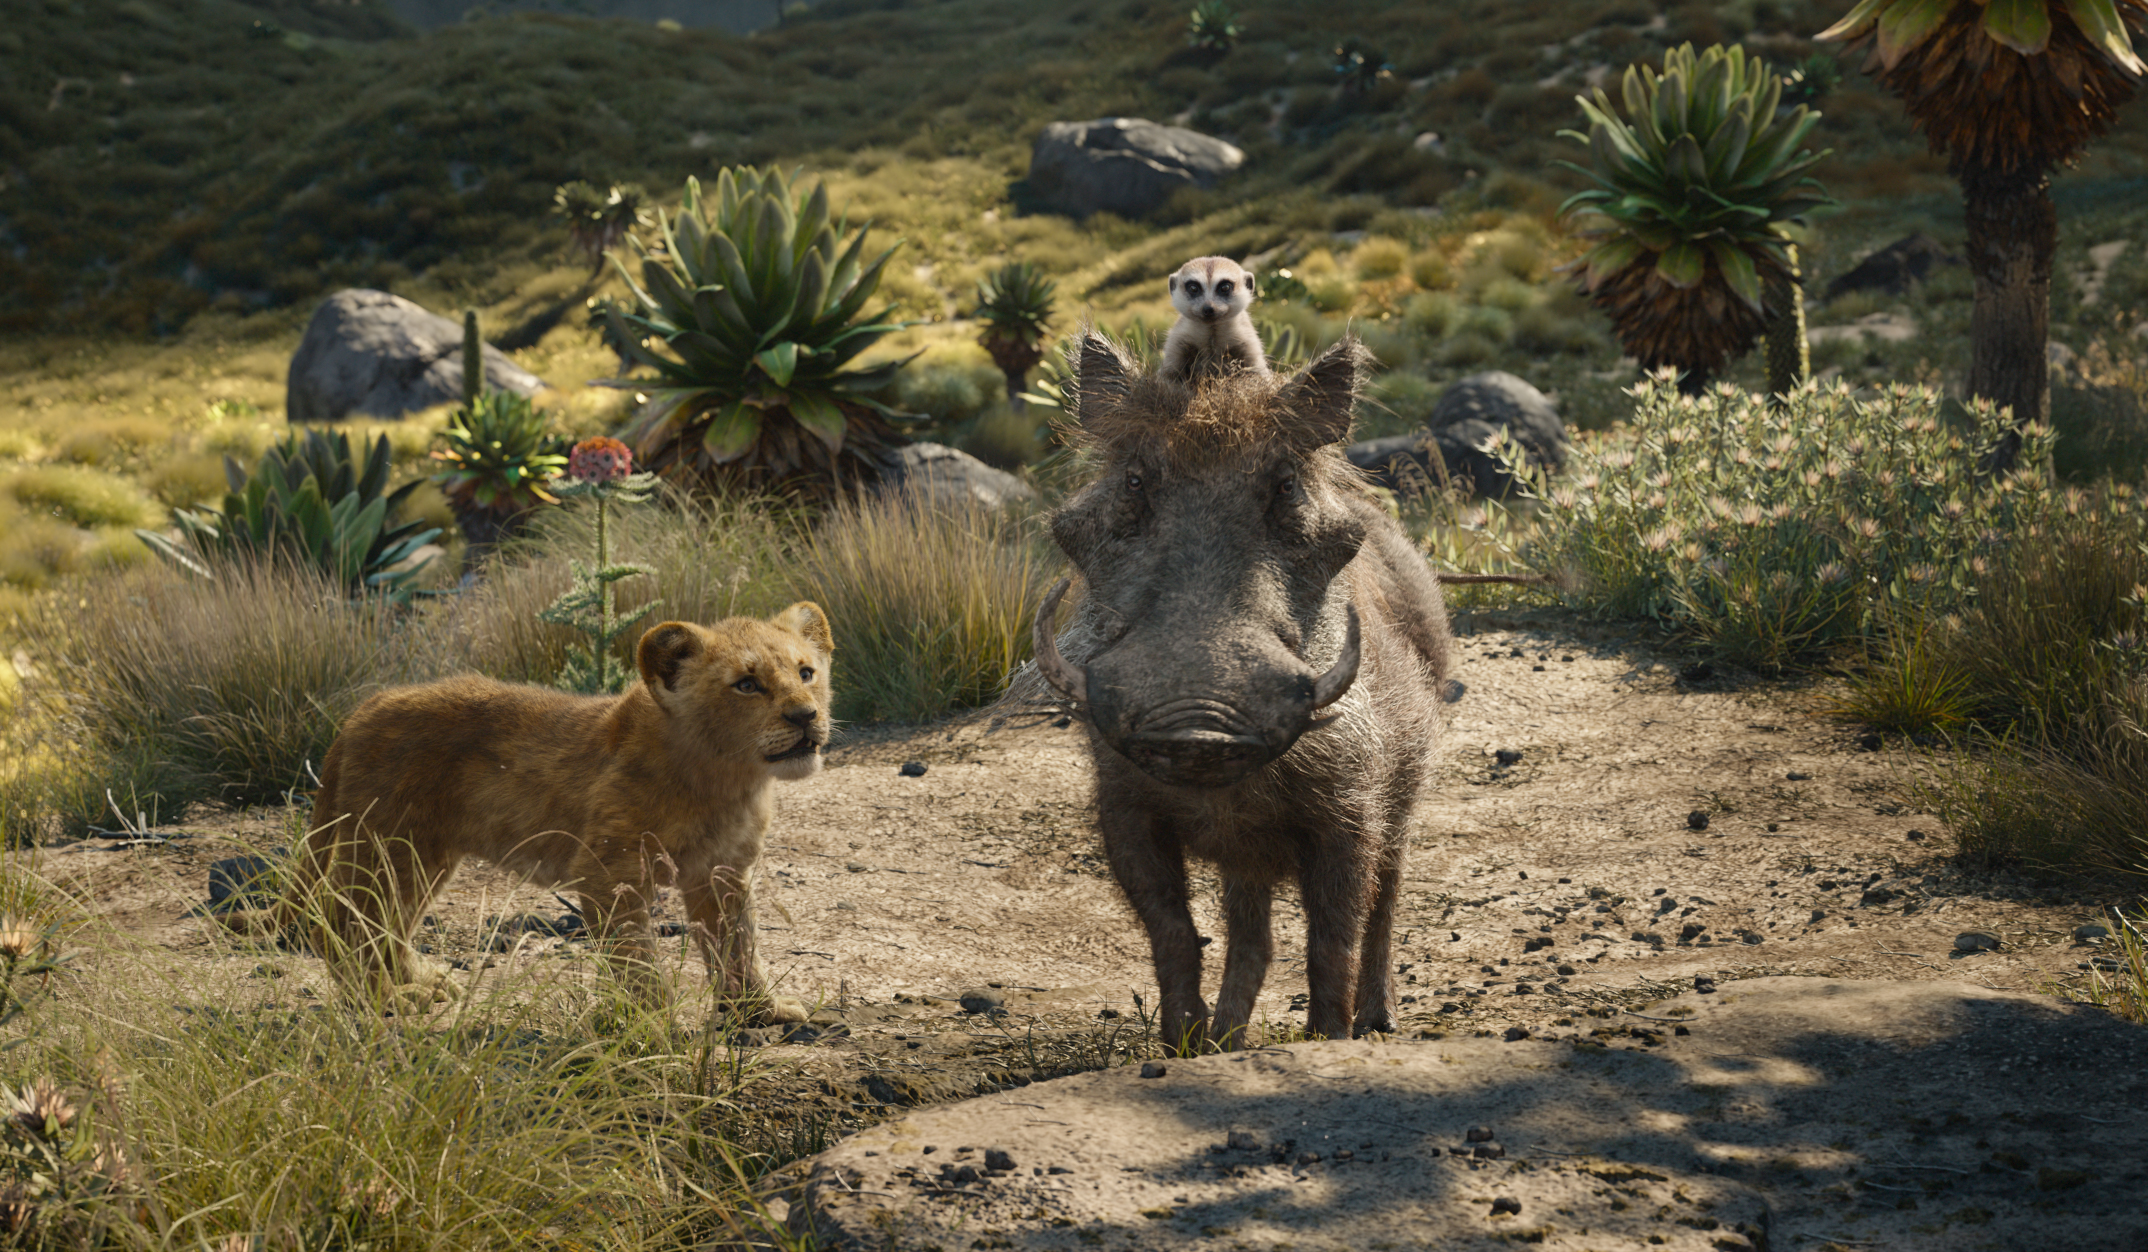 Pumba, Timon, and Simba, in Disney's live-action The Lion King